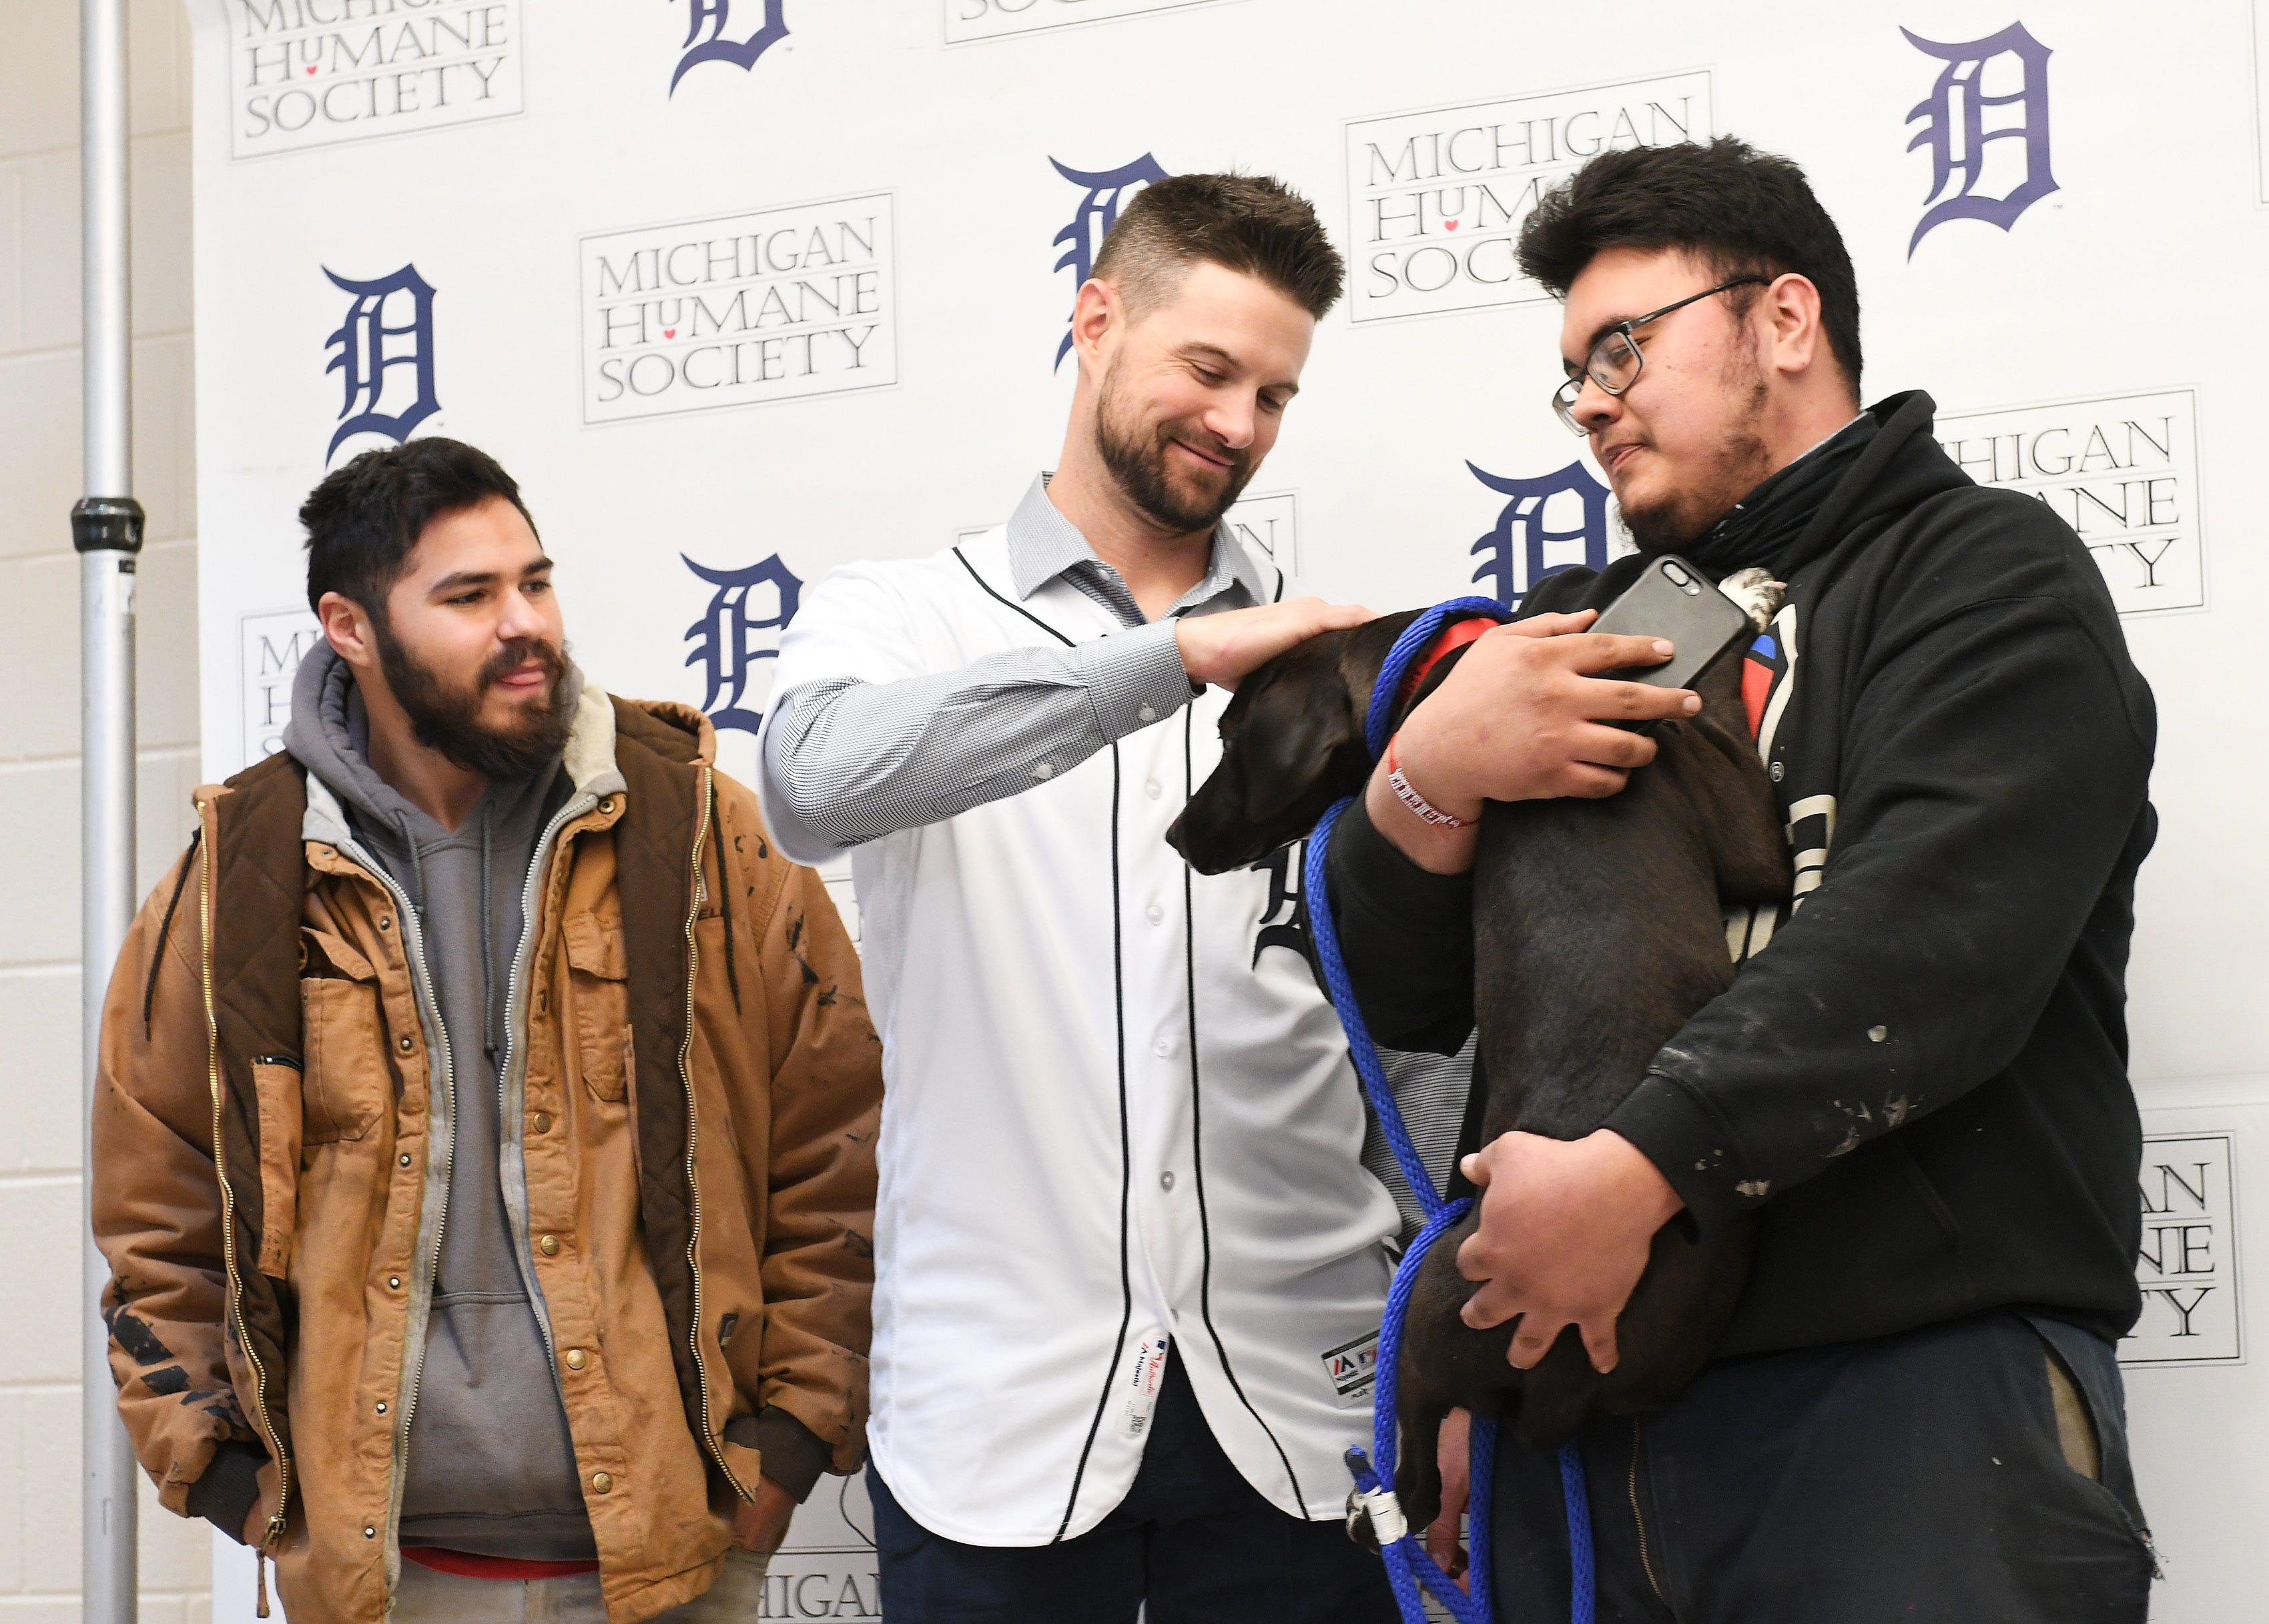 Tigers shortstop Jordy Mercer pets Lark who is being adopted by Marcelo Alvarado, 24, of Detroit, right, 25, with Marcelo's cousin, Gabriel Angel 25, left, at the Michigan Humane Society.